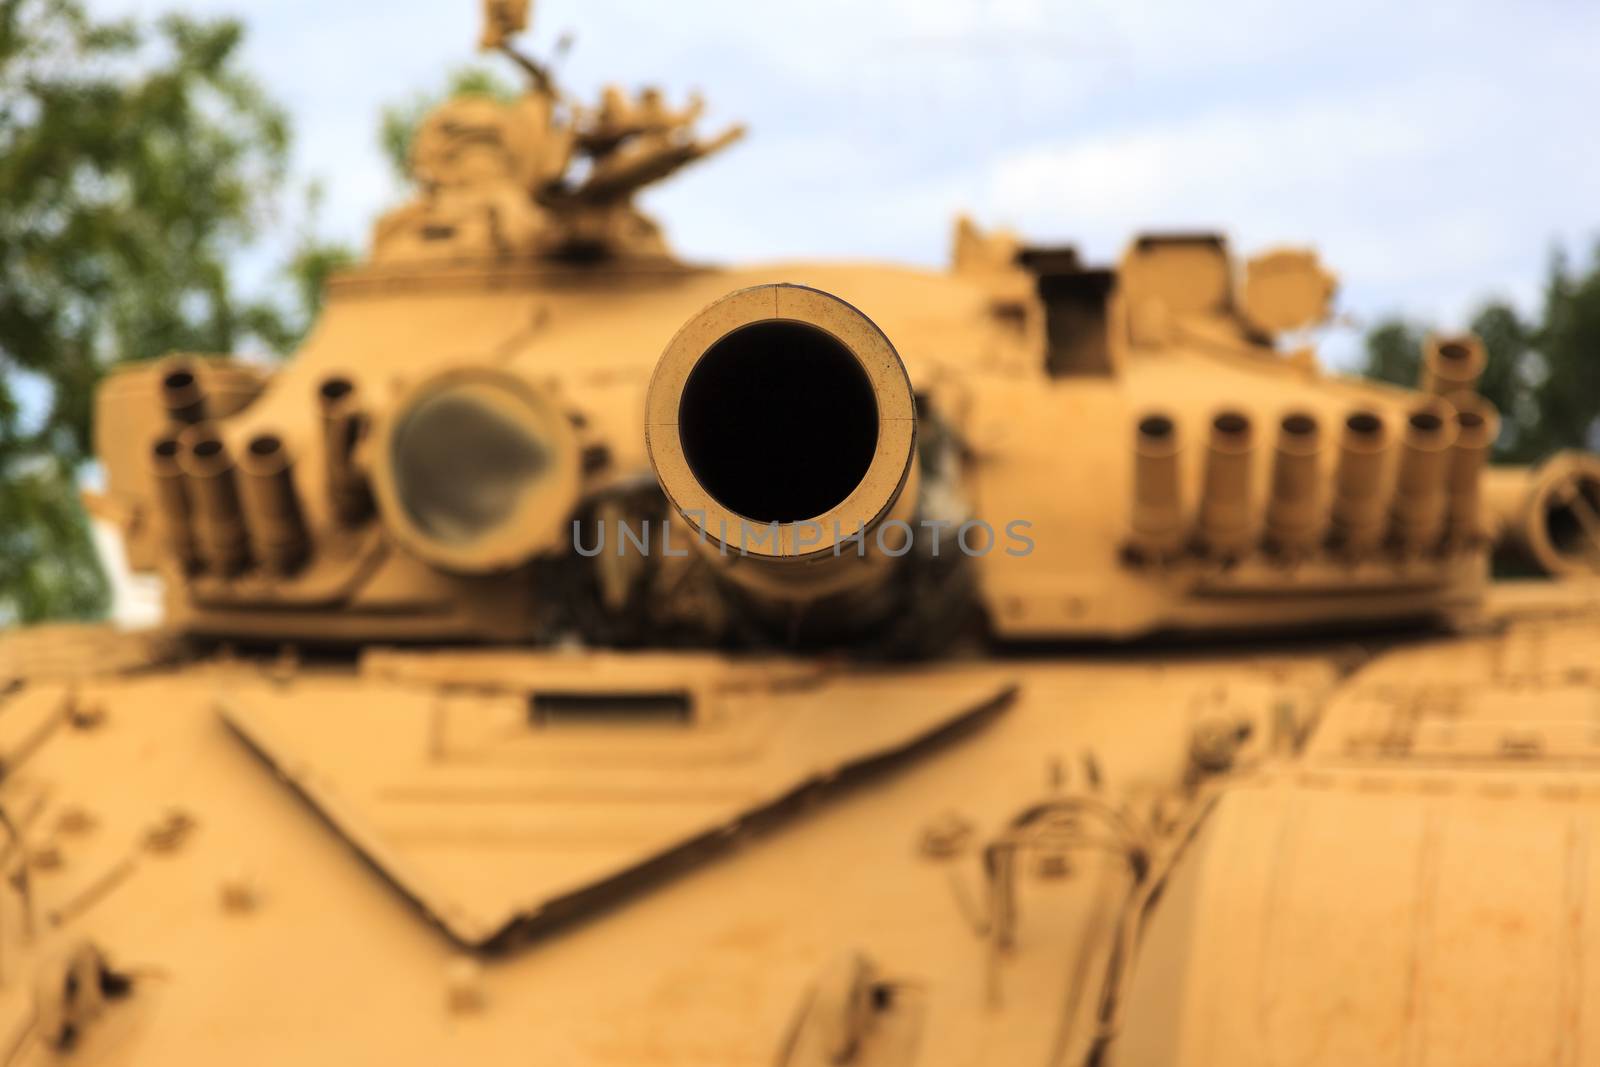 CALGARY CANADA JUN 13 2015:  The Military Museum organized "Summer Skirmish" event where an unidentified soldier is seen  in a historical Reenactment Battle. T-72 main battle tank on display.